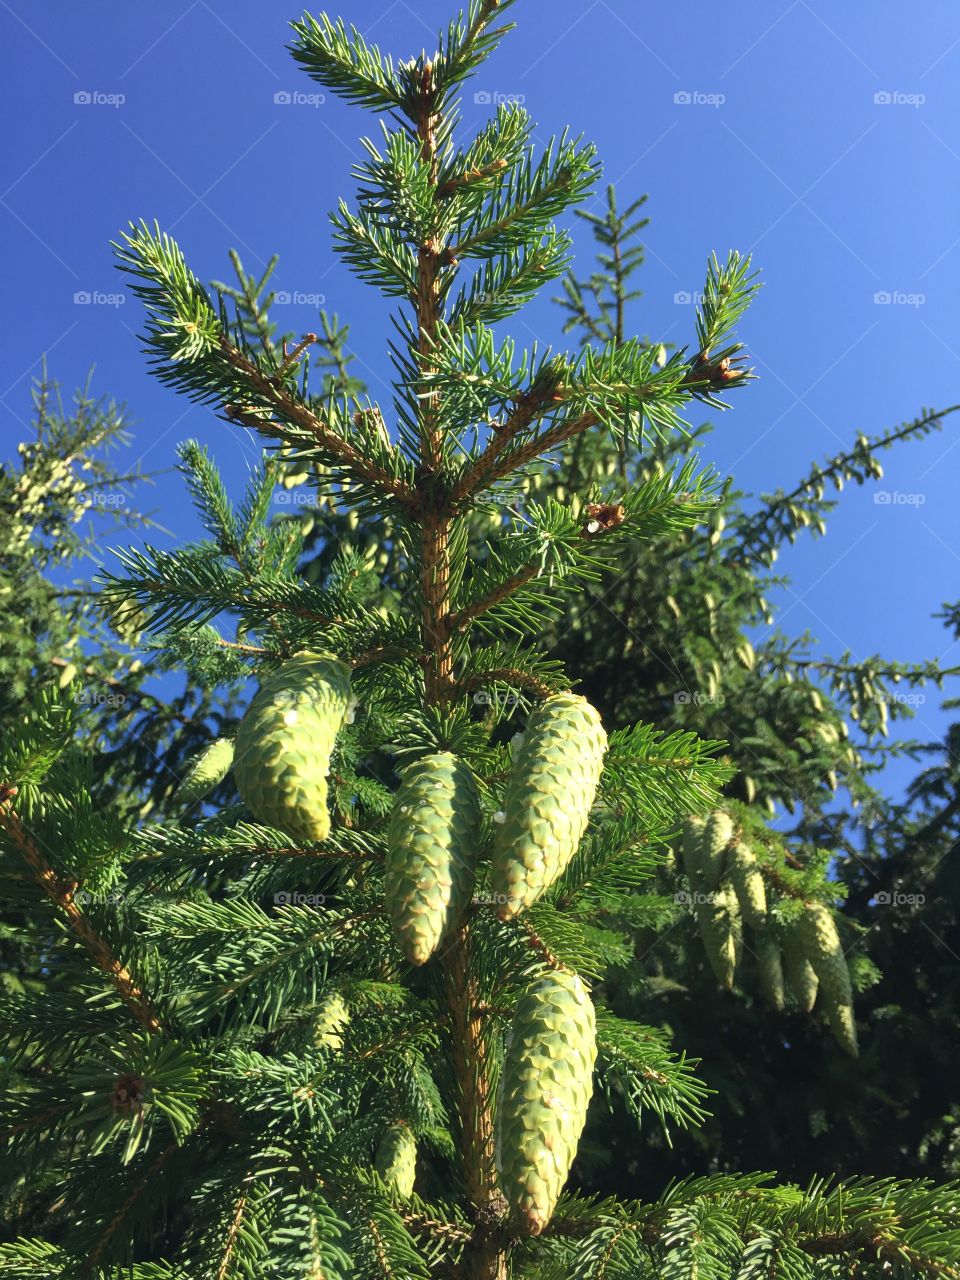 spruce tree with large cones against the sky